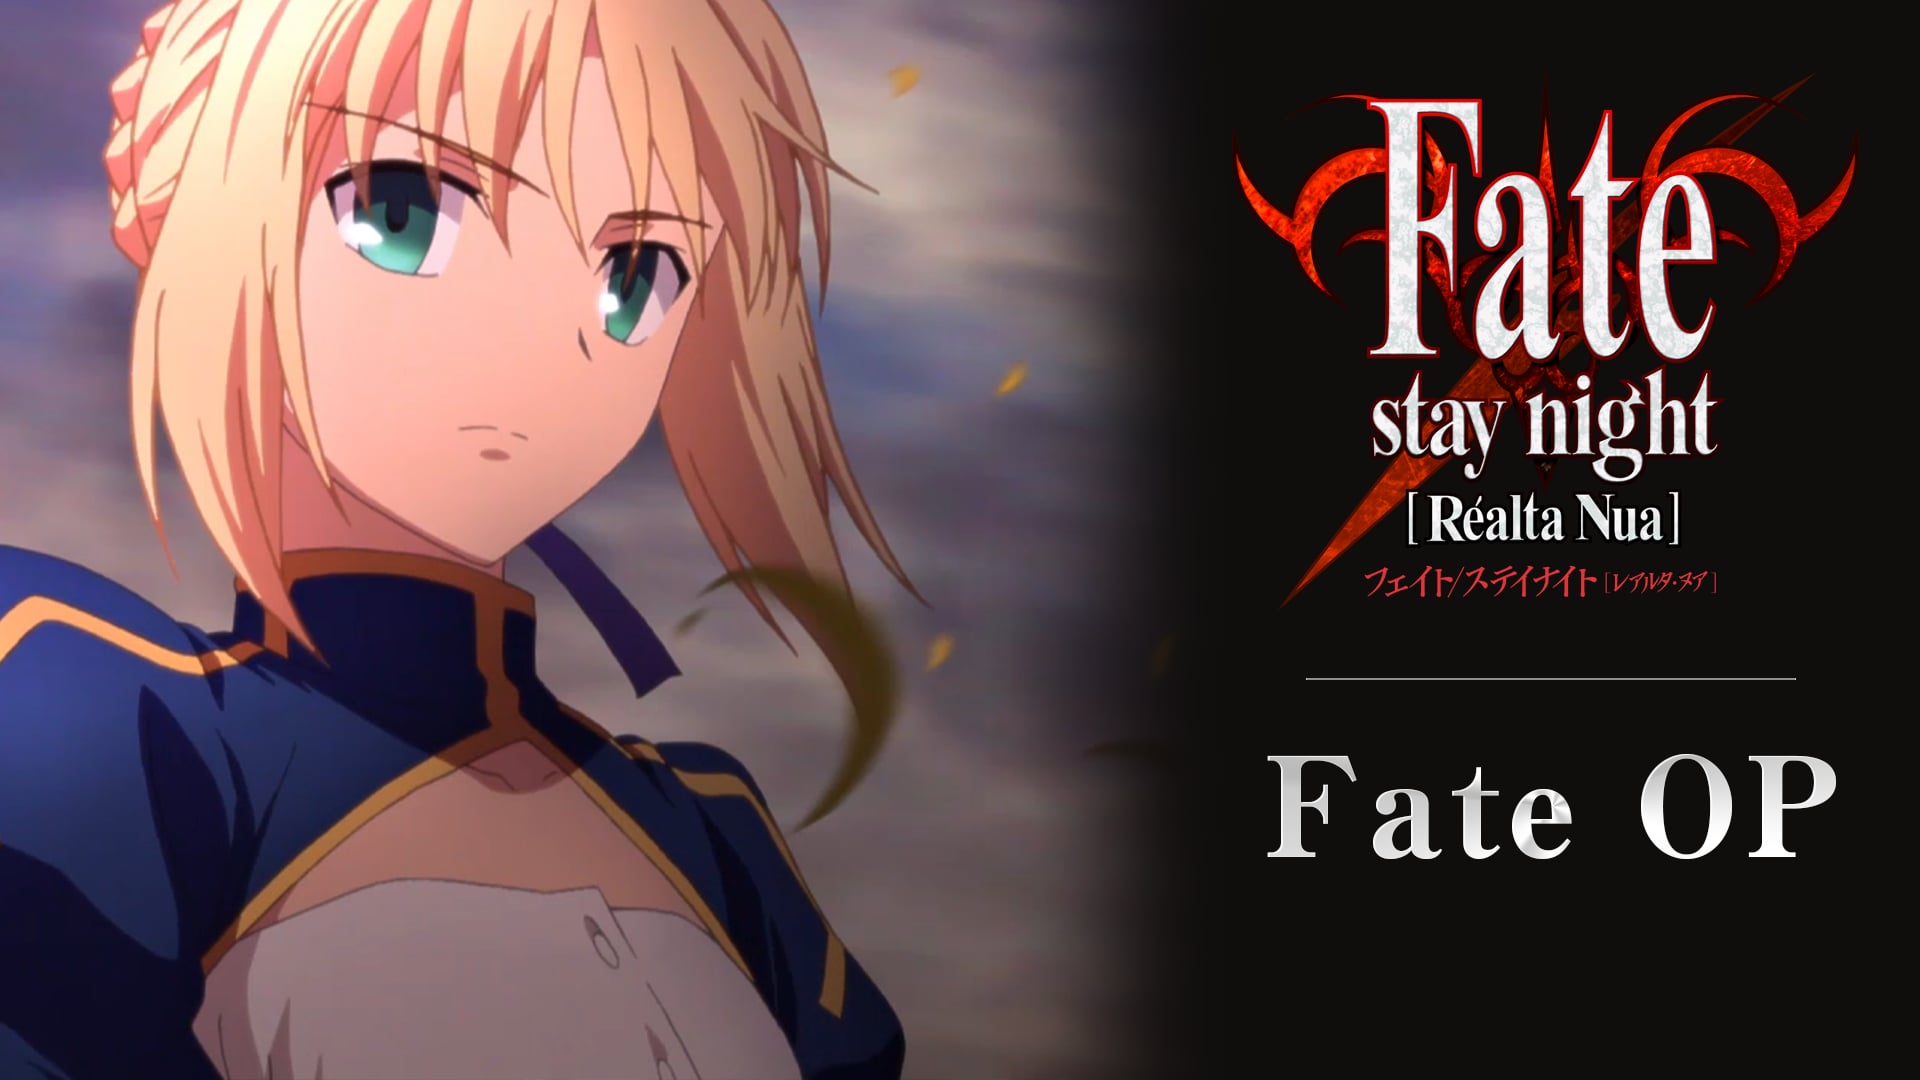 「Fate/stay night [Réalta Nua] 」Fate(セイバールート)オープニングアニメーション